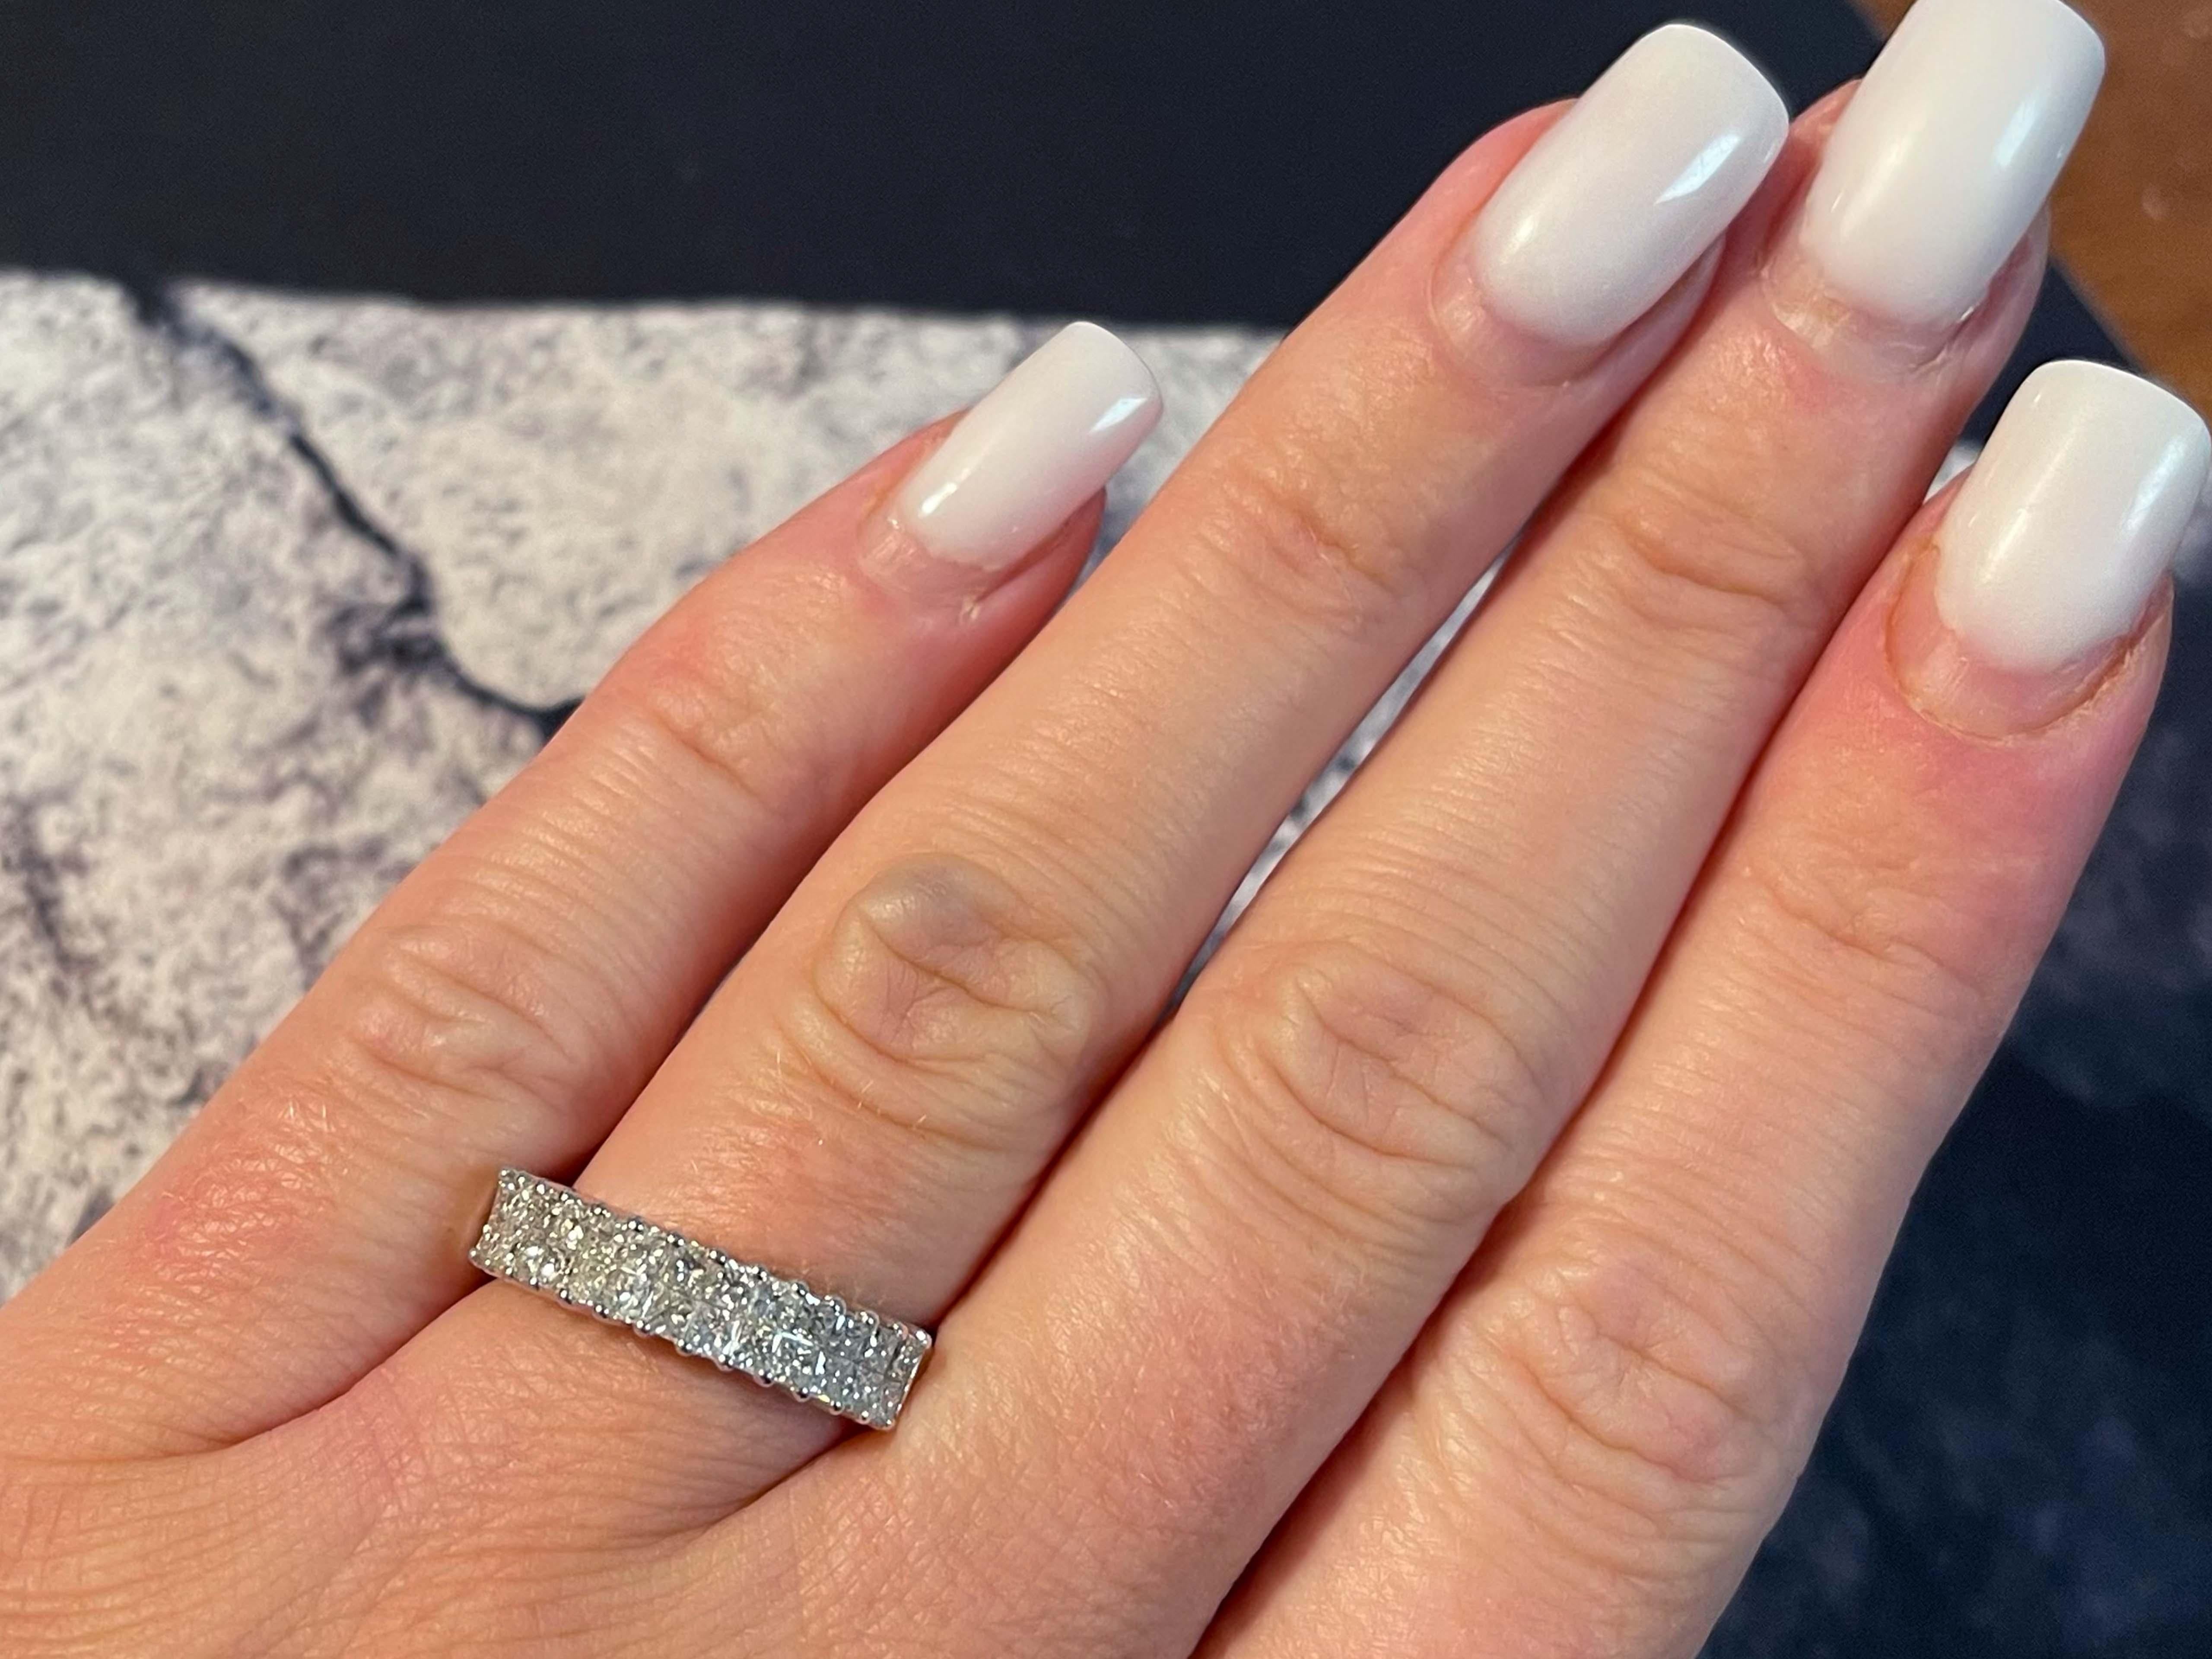 Item Specifications:

Metal: 18k White Gold

Diamond Count: 26 princess cut

Total Diamond Carat Weight: 1.15 carats 

Diamond Color: G-H

Diamond Clarity: SI

Ring Size: 6.5

Total Weight: 4.8 Grams

Stamped: 